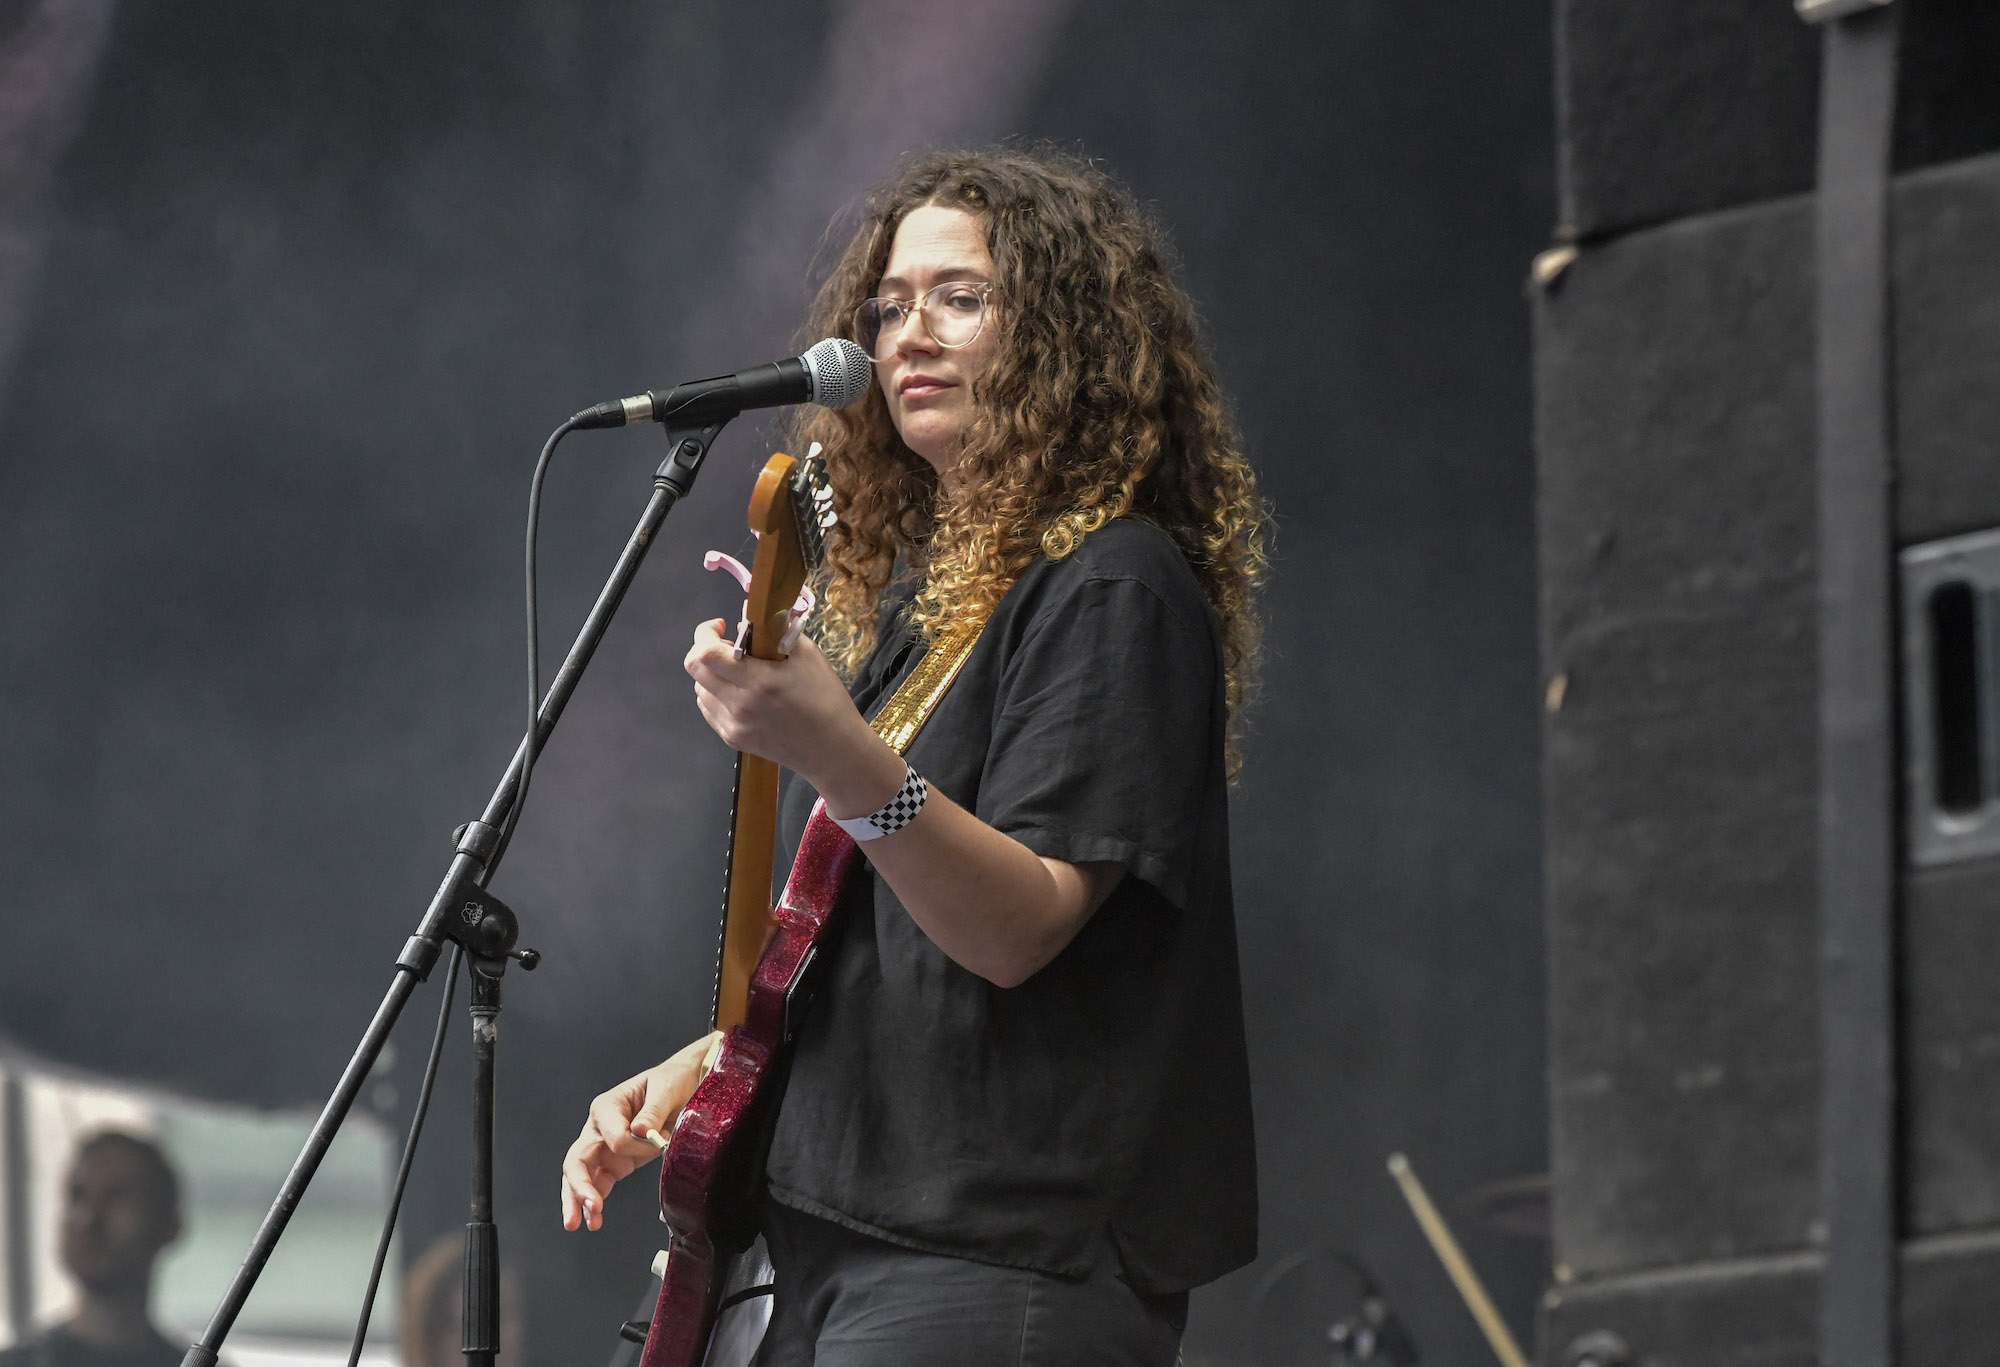 Camp Cope Live At Pitchfork [GALLERY] 3